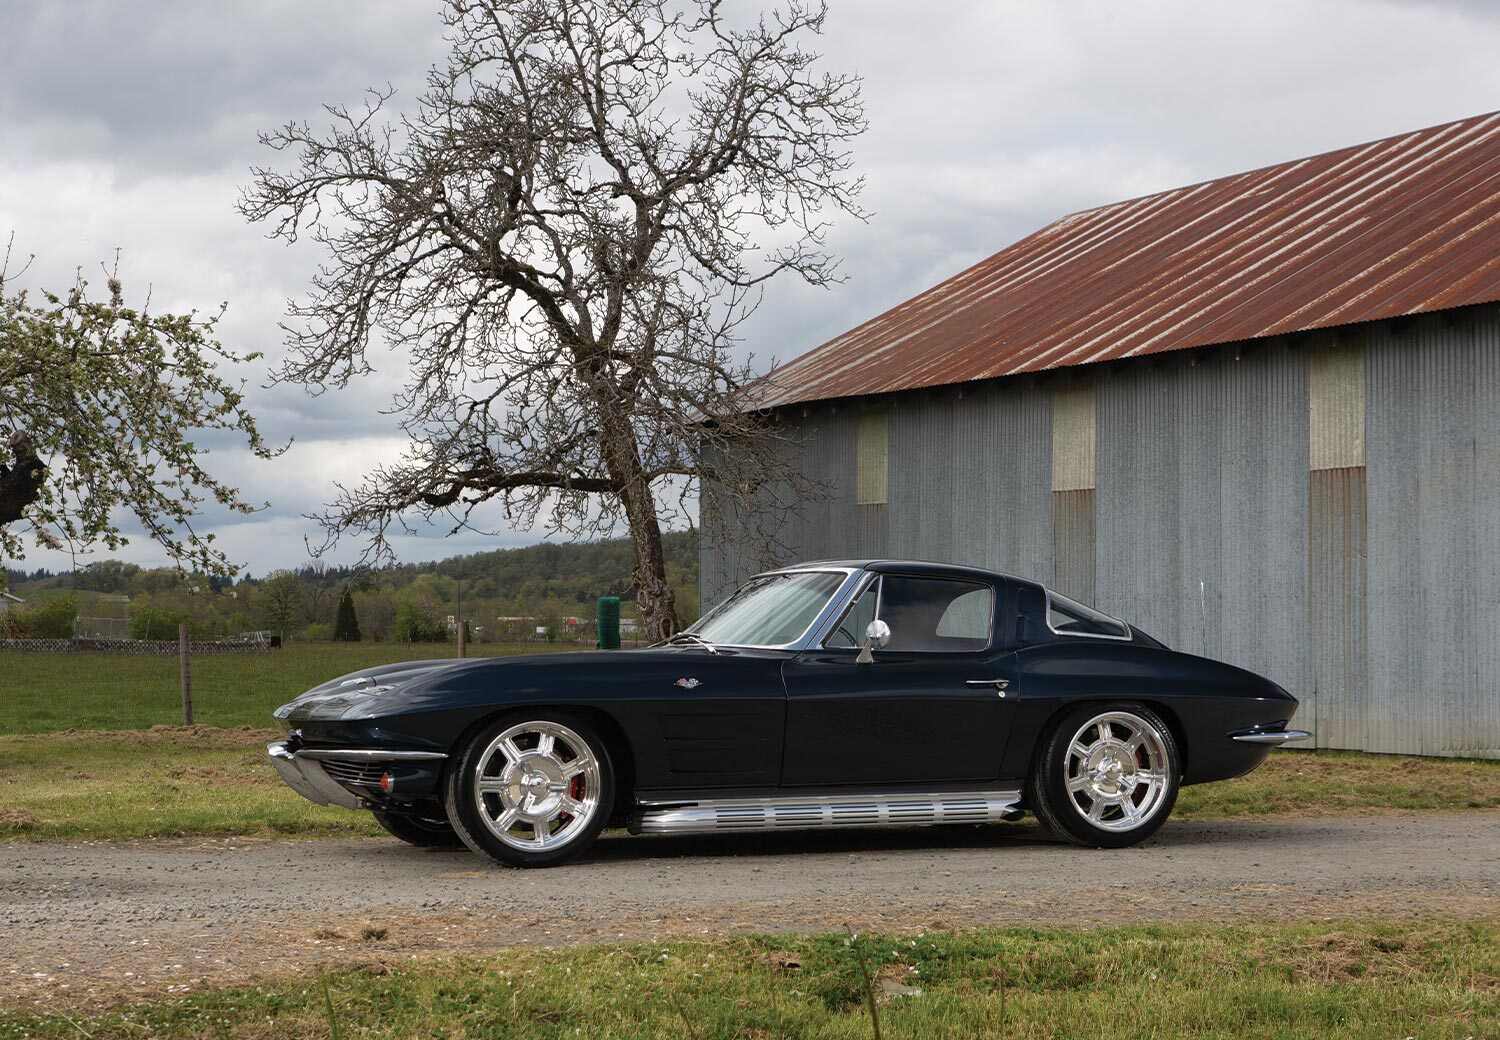 driver's side profile view of the '63 Corvette Sting Ray parked on a dirt road near a large shed